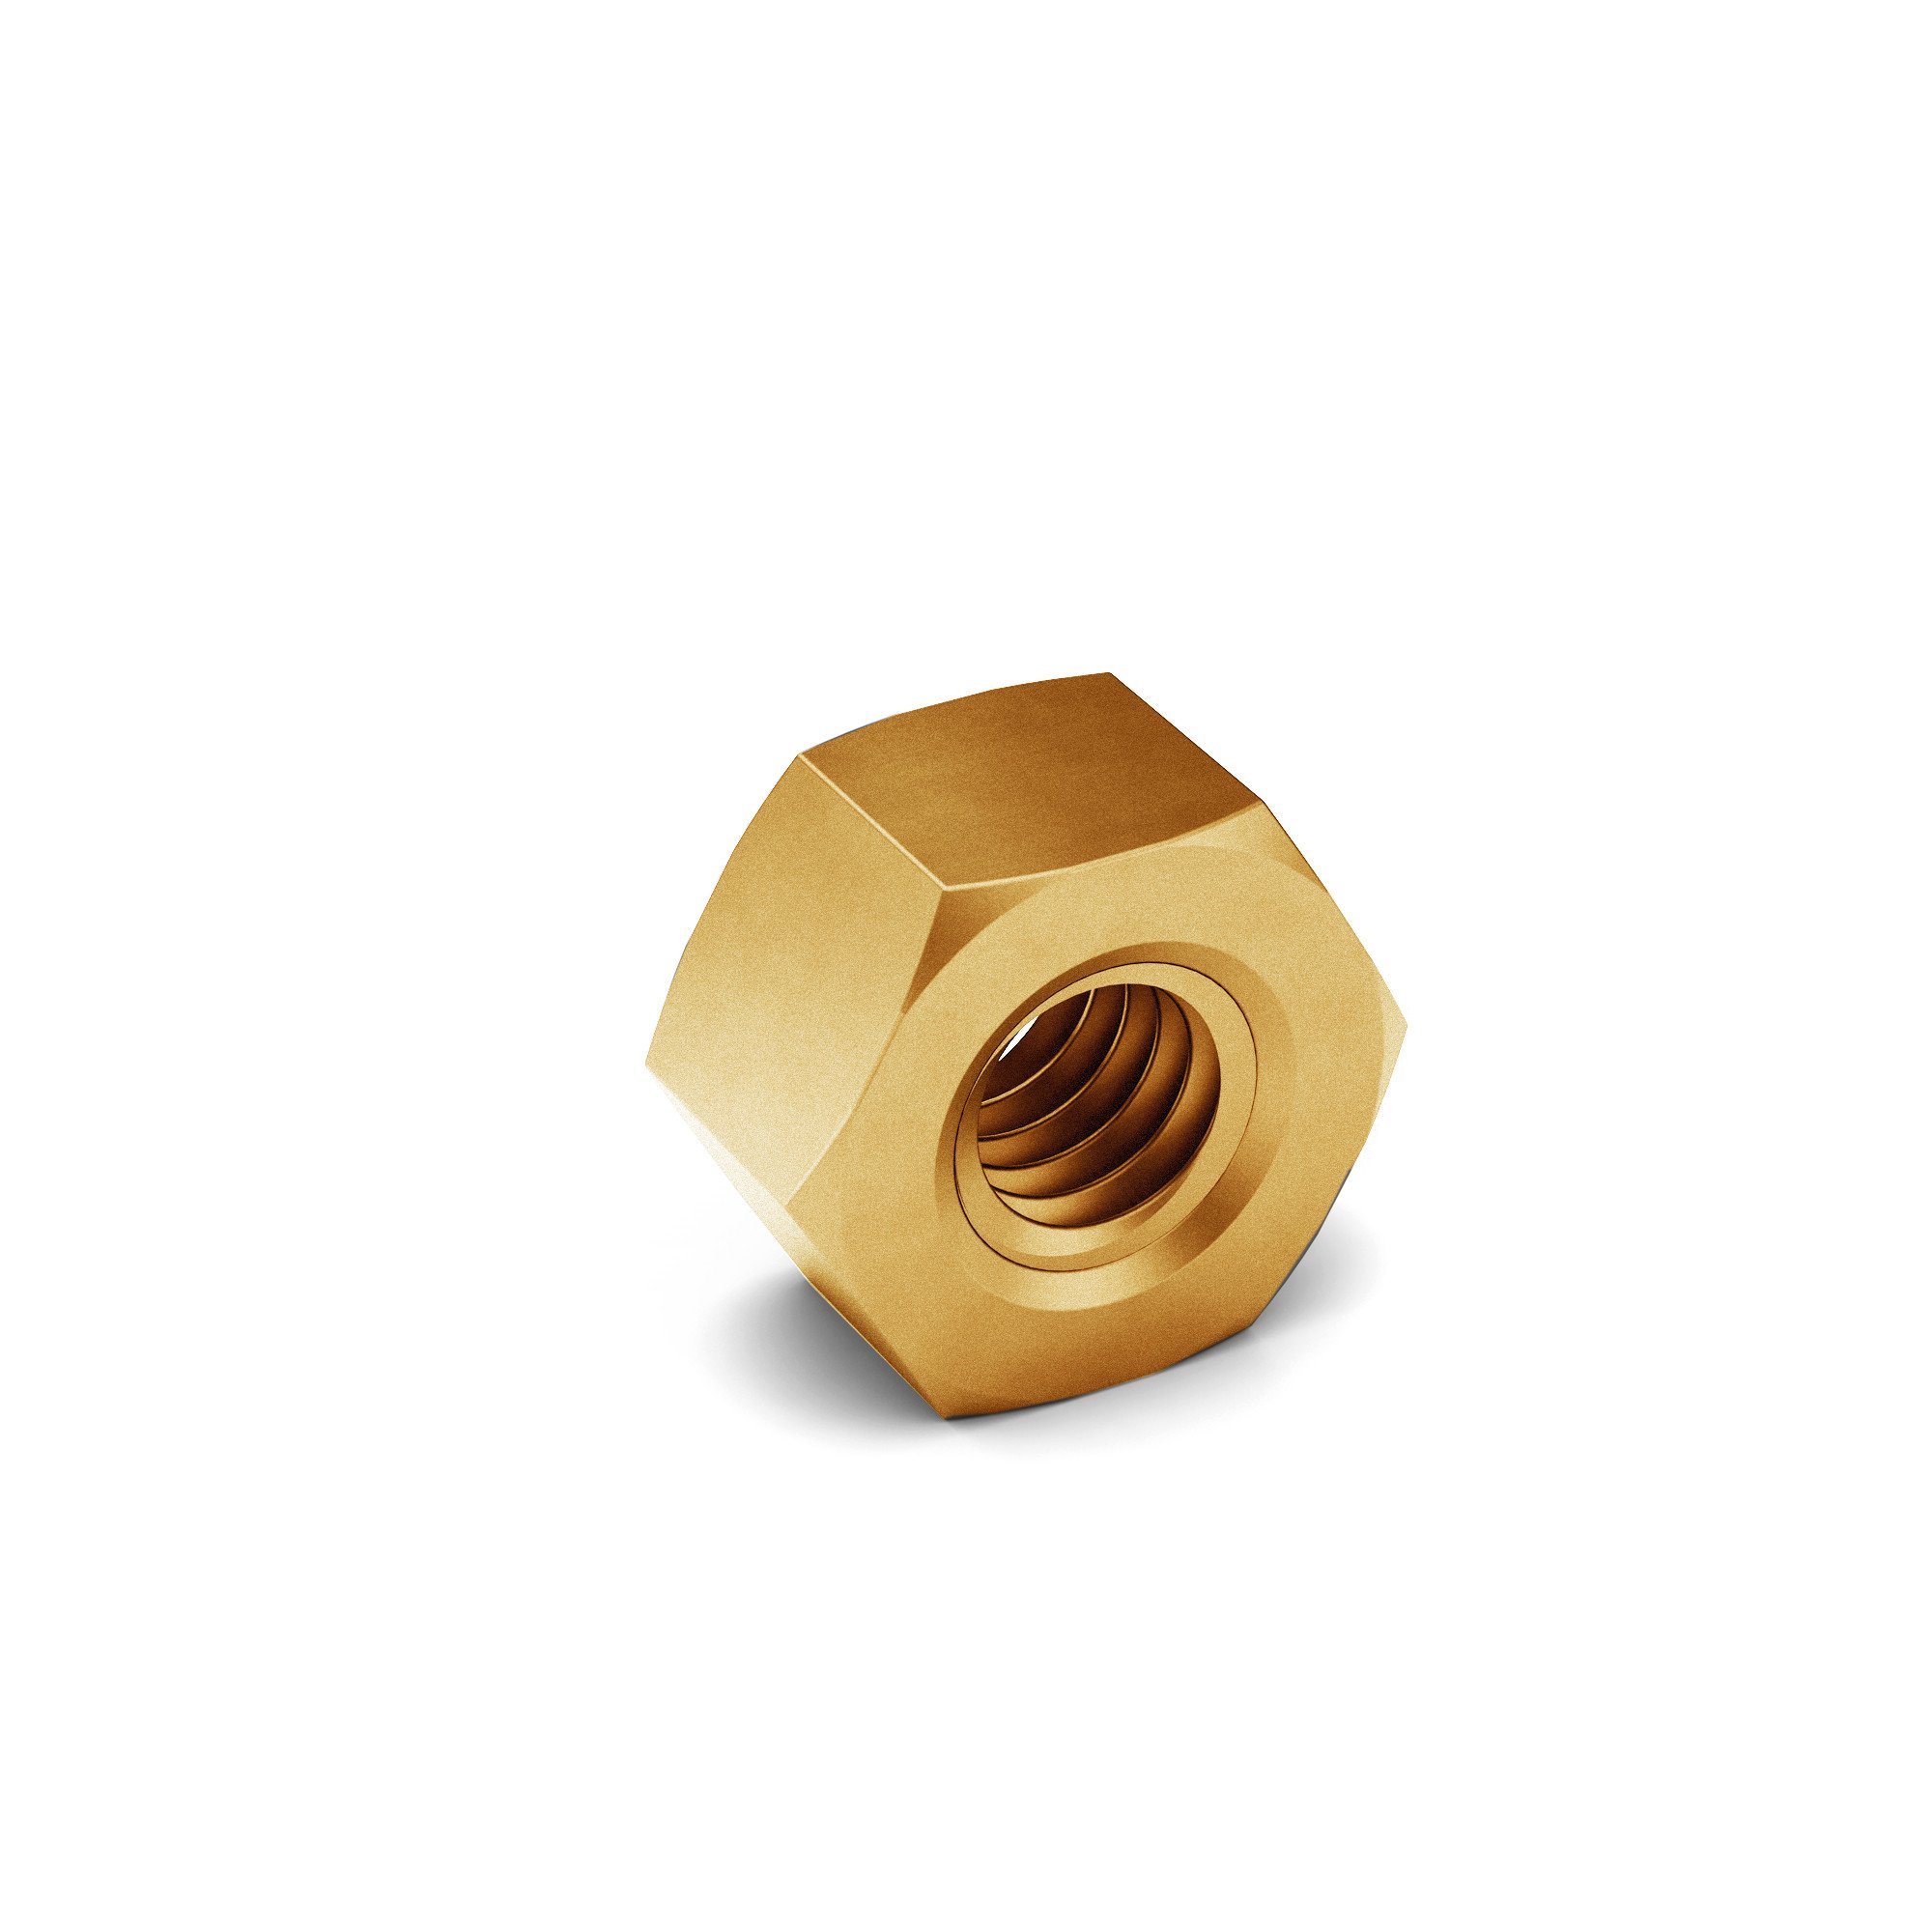 7/16-20 J995 GR 8 Hex Nut Zinc Yellow Made in USA